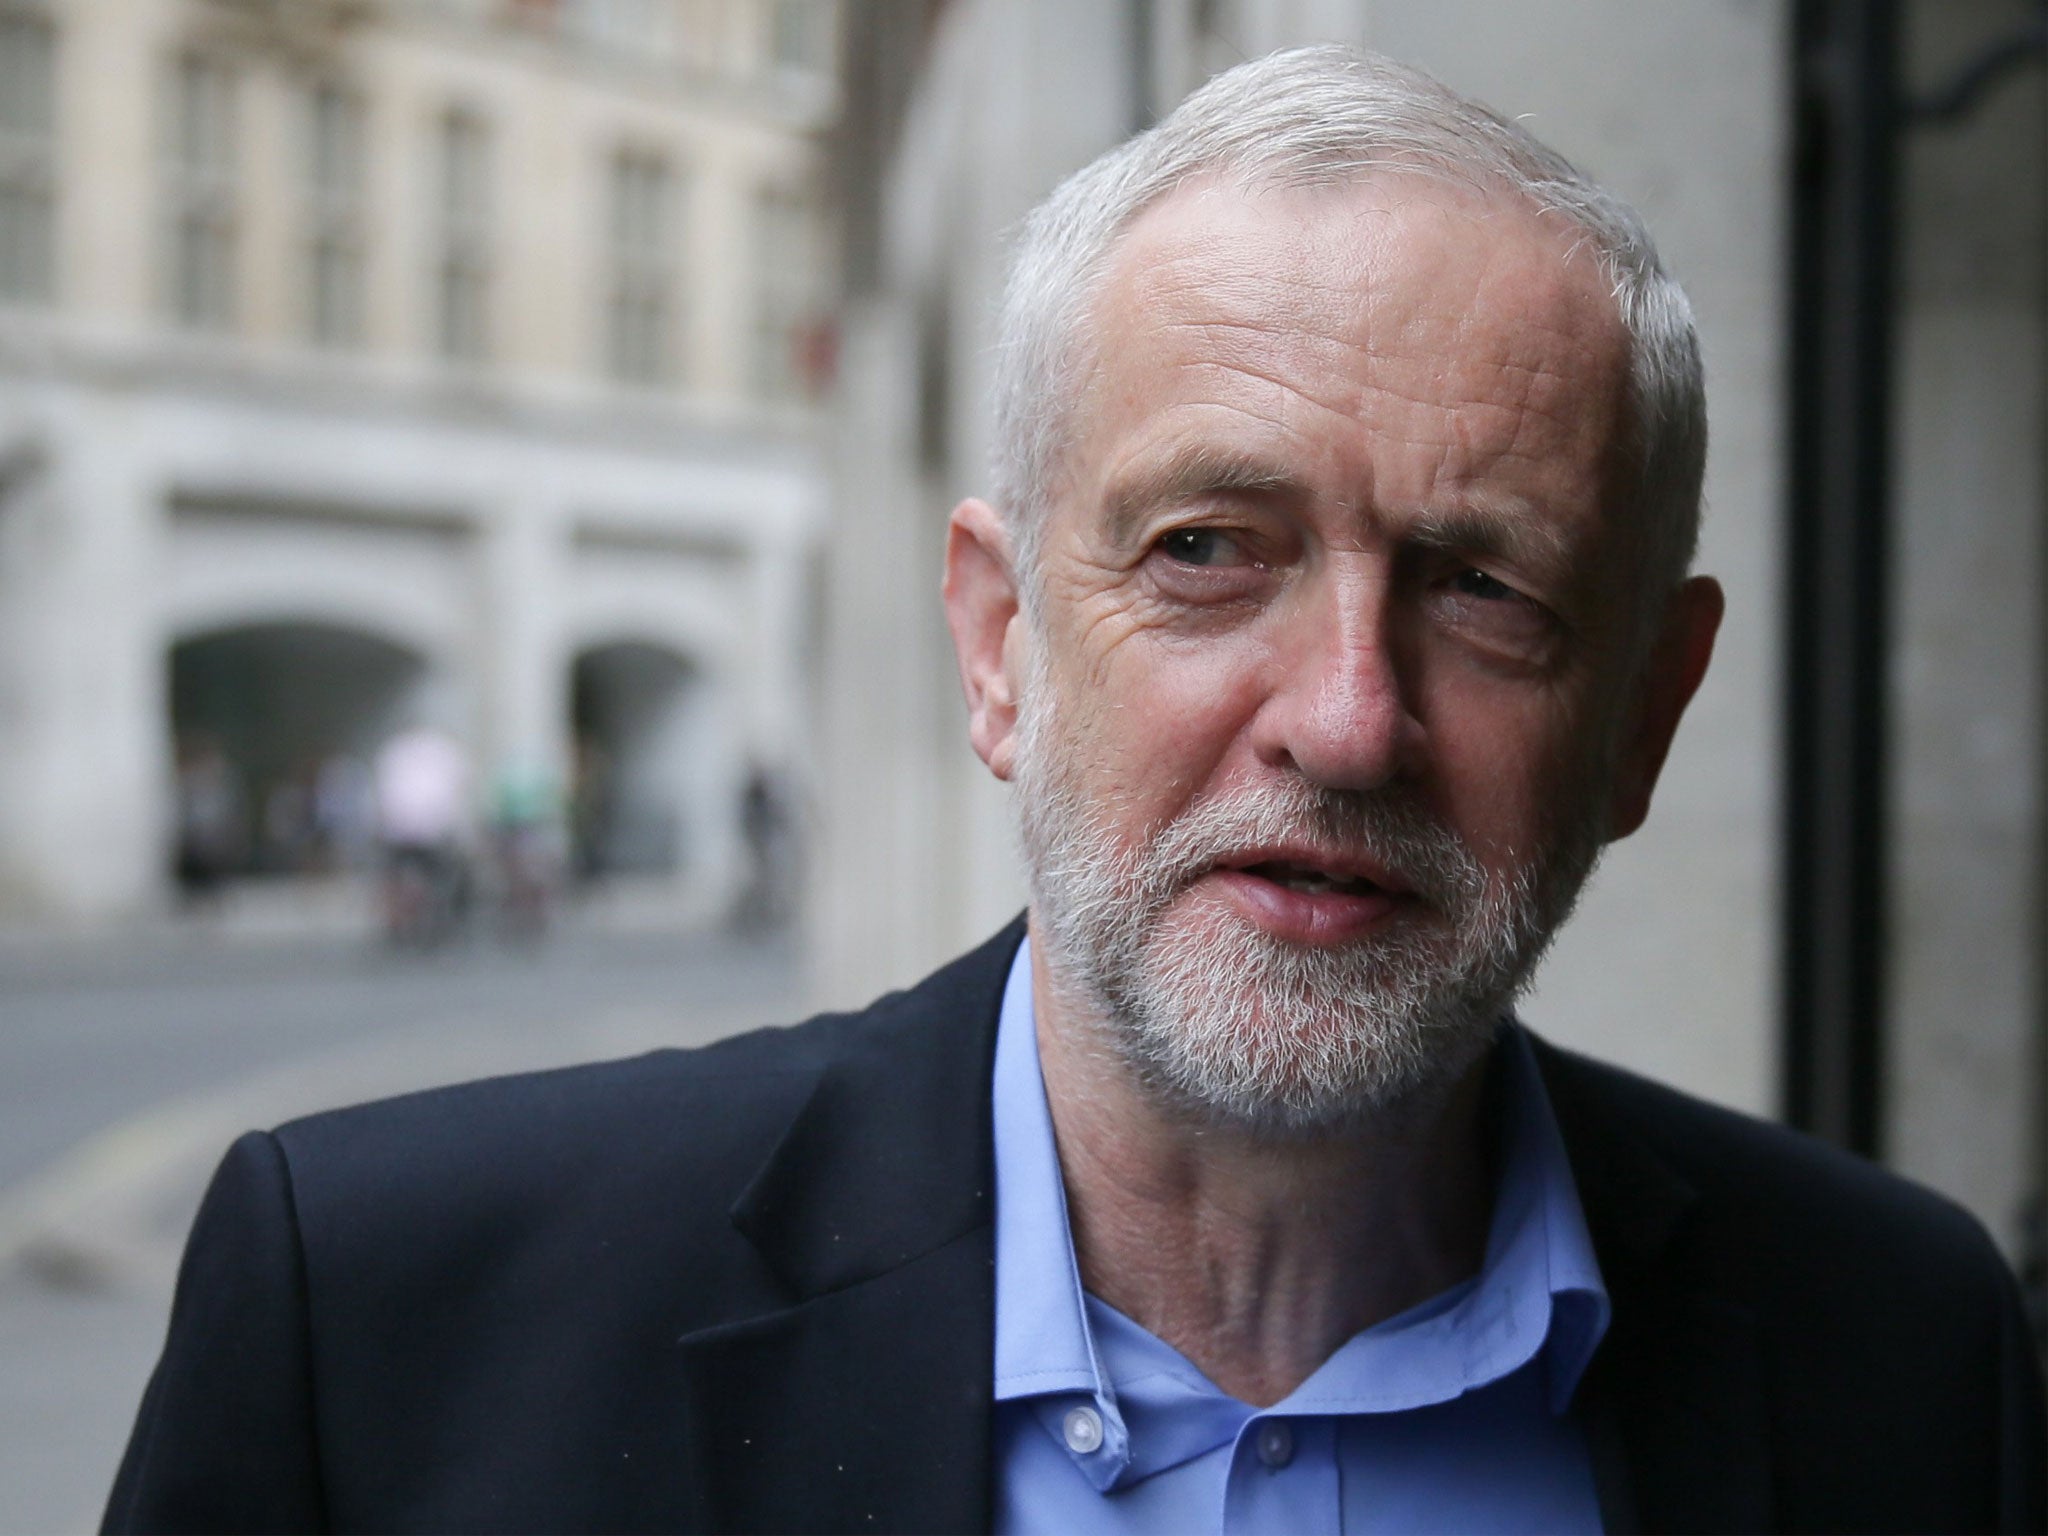 Labour leader said voters would have to wait until 9 June to discover what his policy on the US President's state visit would be